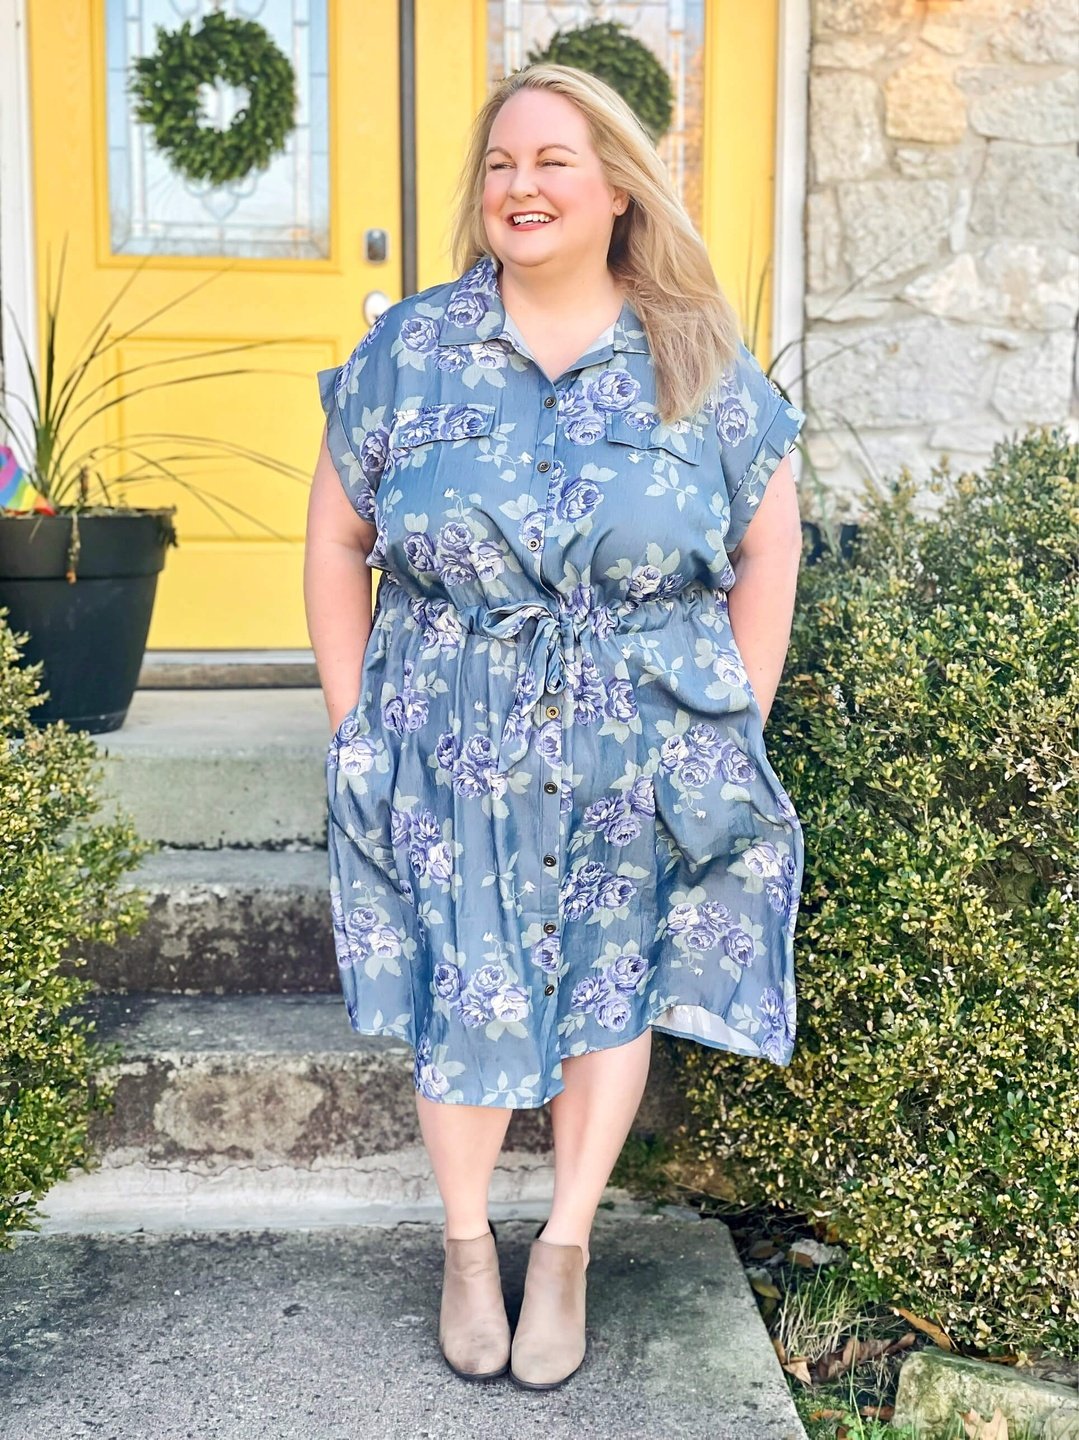 Check Out LuLaRoe's All New Short Sleeve Button-Up Shirtdress-The Stacie